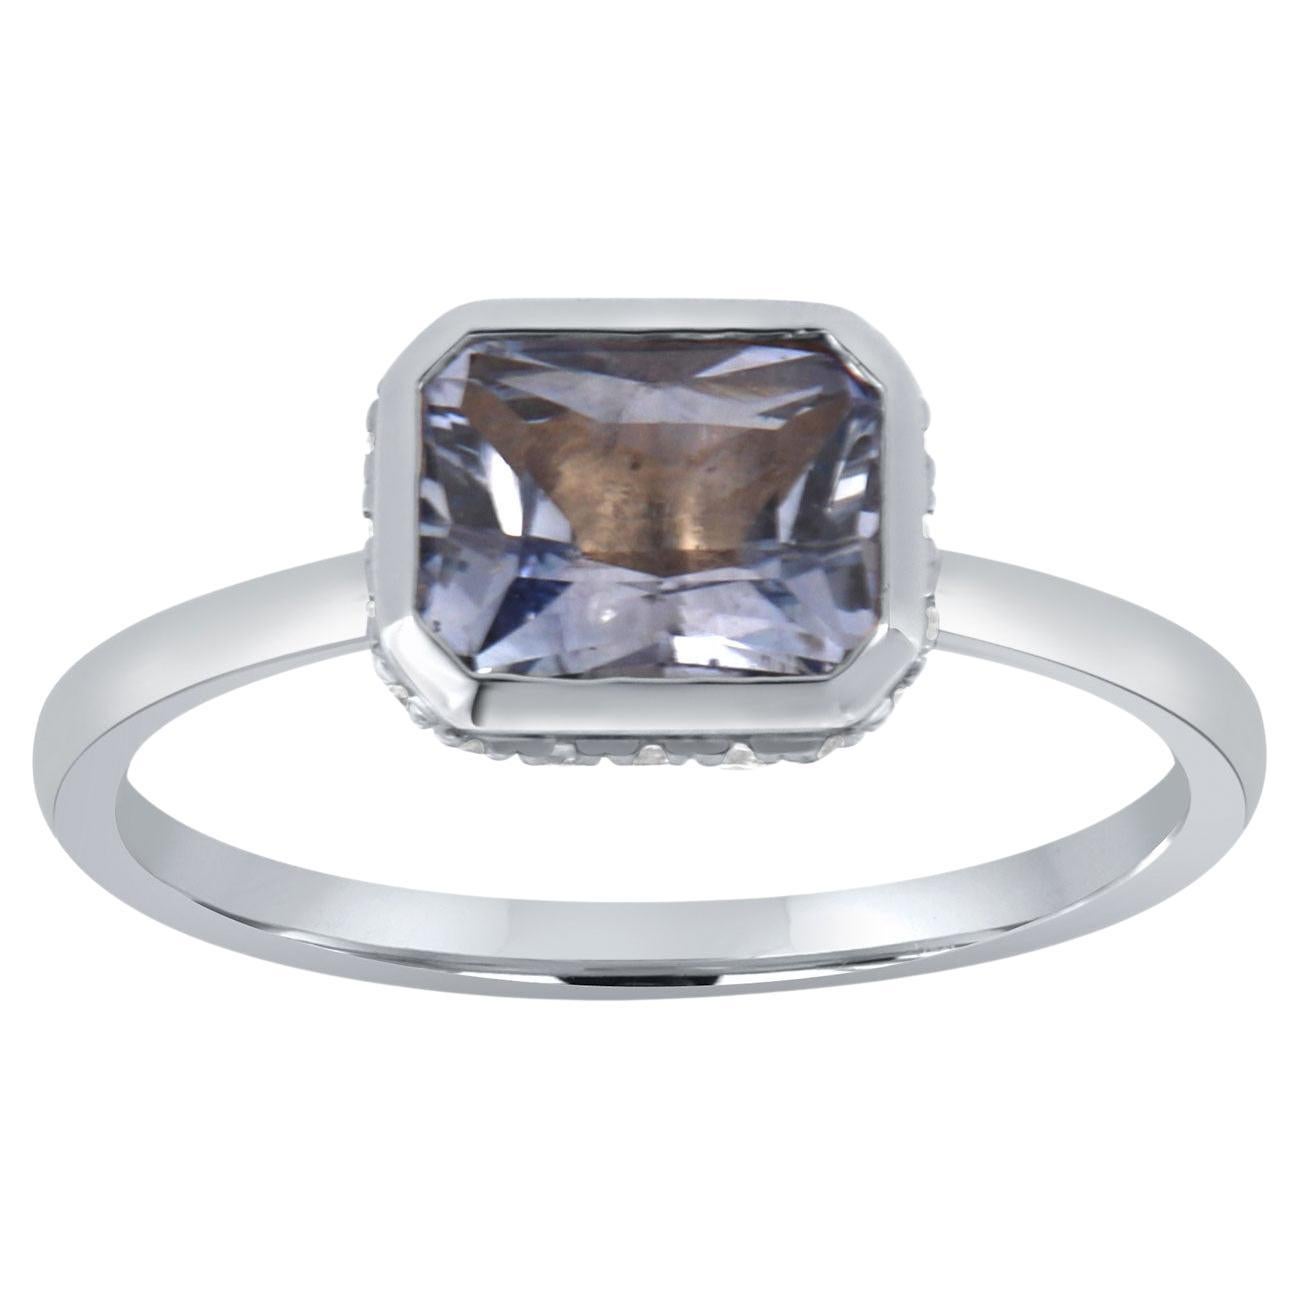 GIA Certified 1.36 Carat "Ice Blue" Sapphire 18K White Gold Diamond Ring For Sale